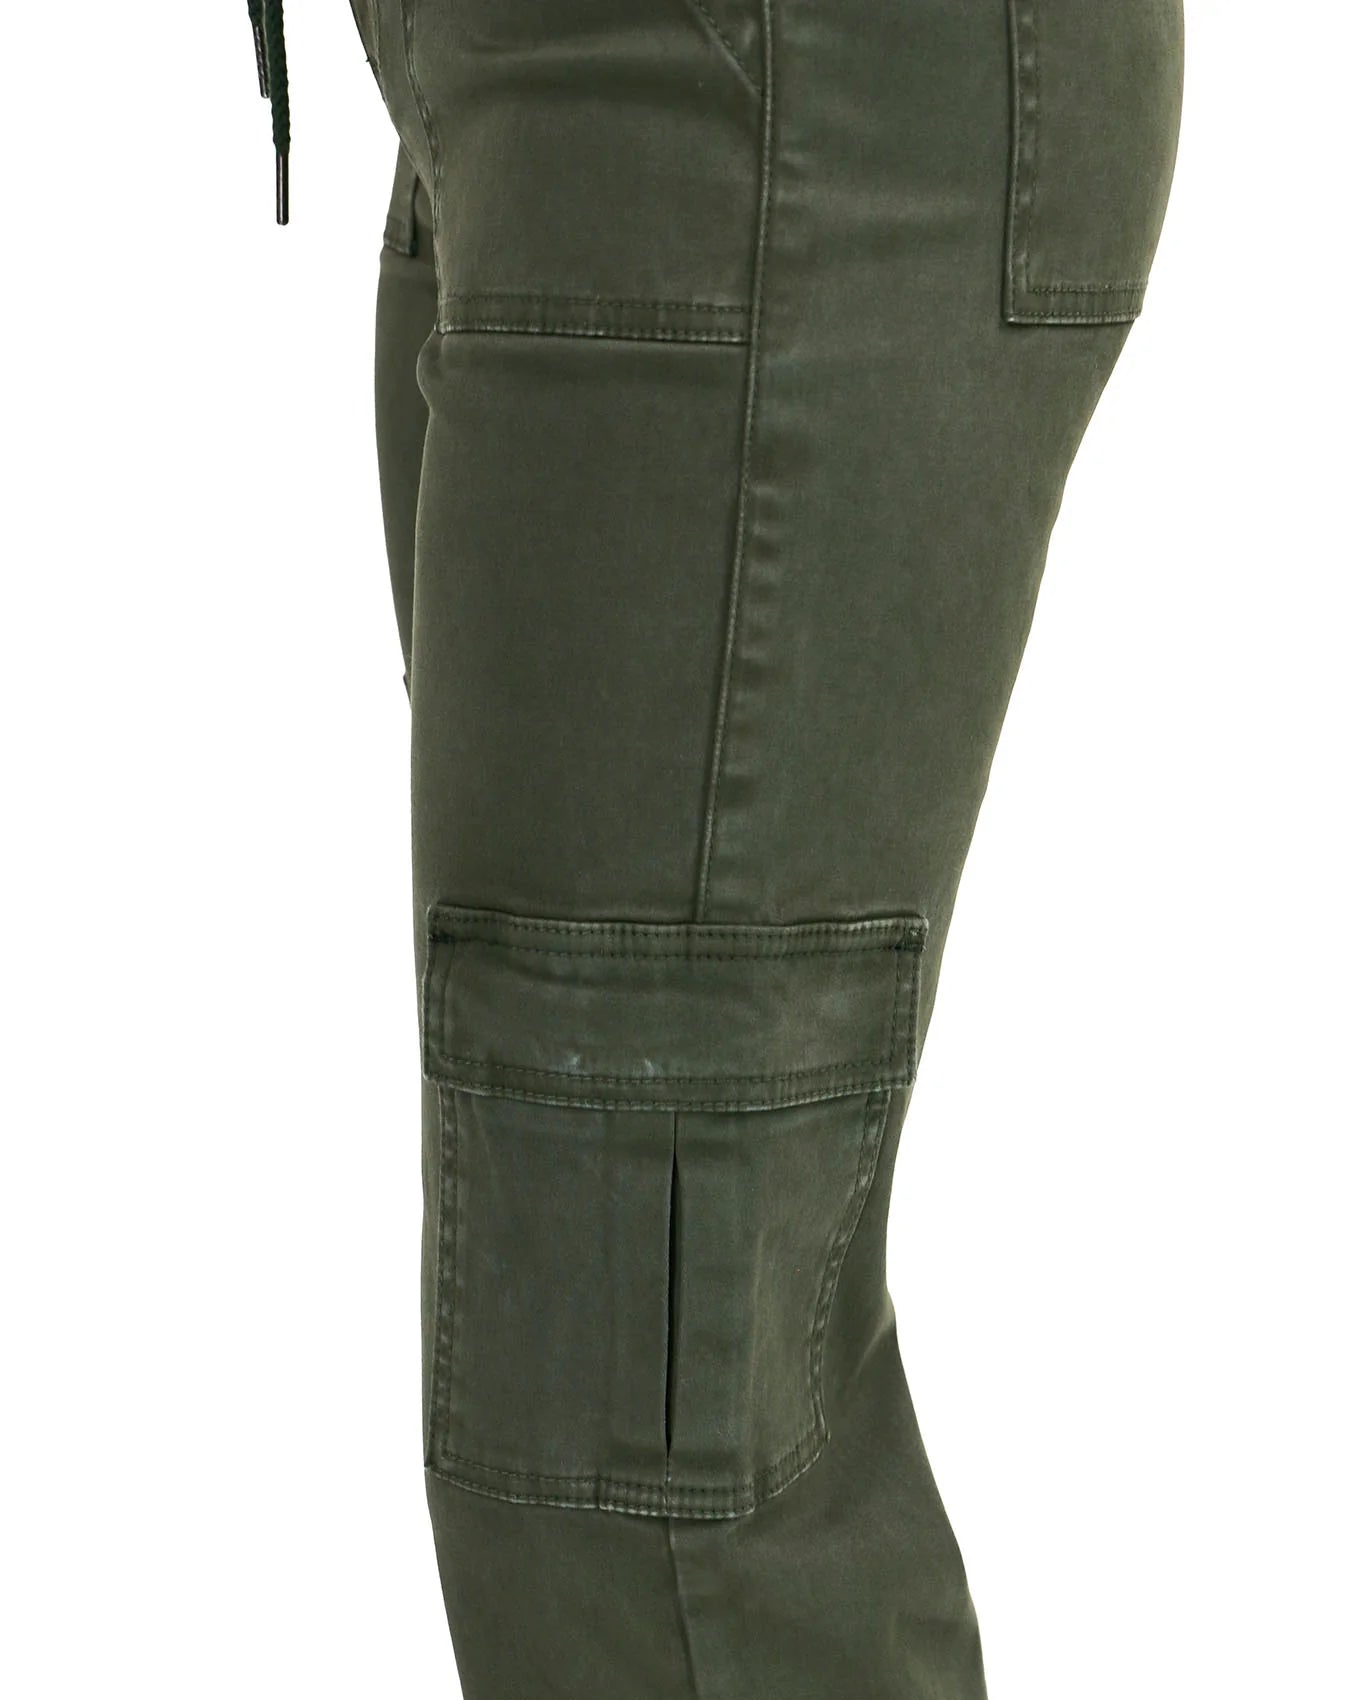 Deep Green Sueded Twill Cargo Pants Fall-Winter grace & lace